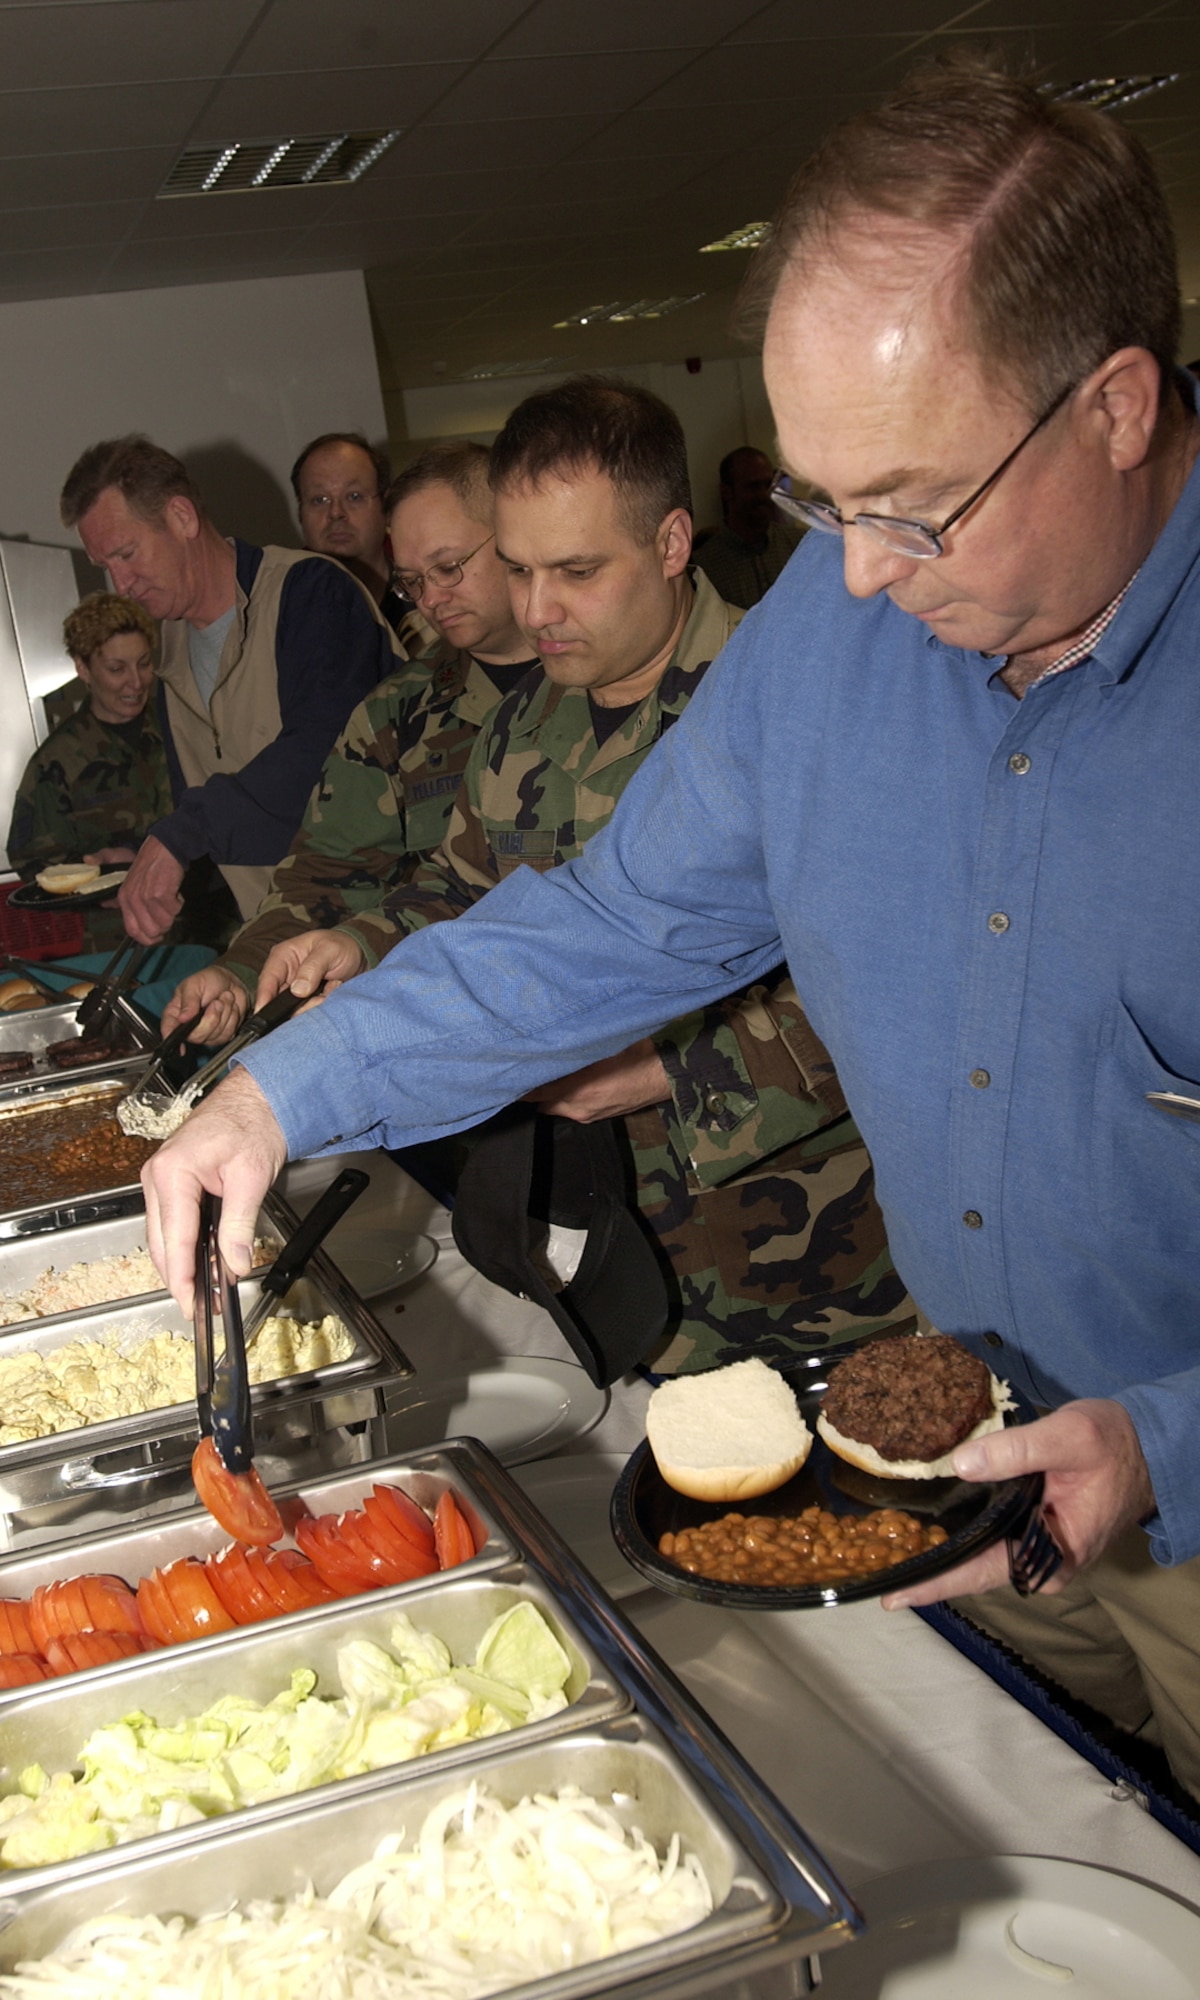 SPANGHDALEM AIR BASE, GERMANY -- After the Eifel Mountain Golf Course ribbon cutting ceremony guests were able to indulge in a buffet lunch in the newly re-opened dining area April 10.  (US Air Force photo/Staff Sgt. Ray Mills)